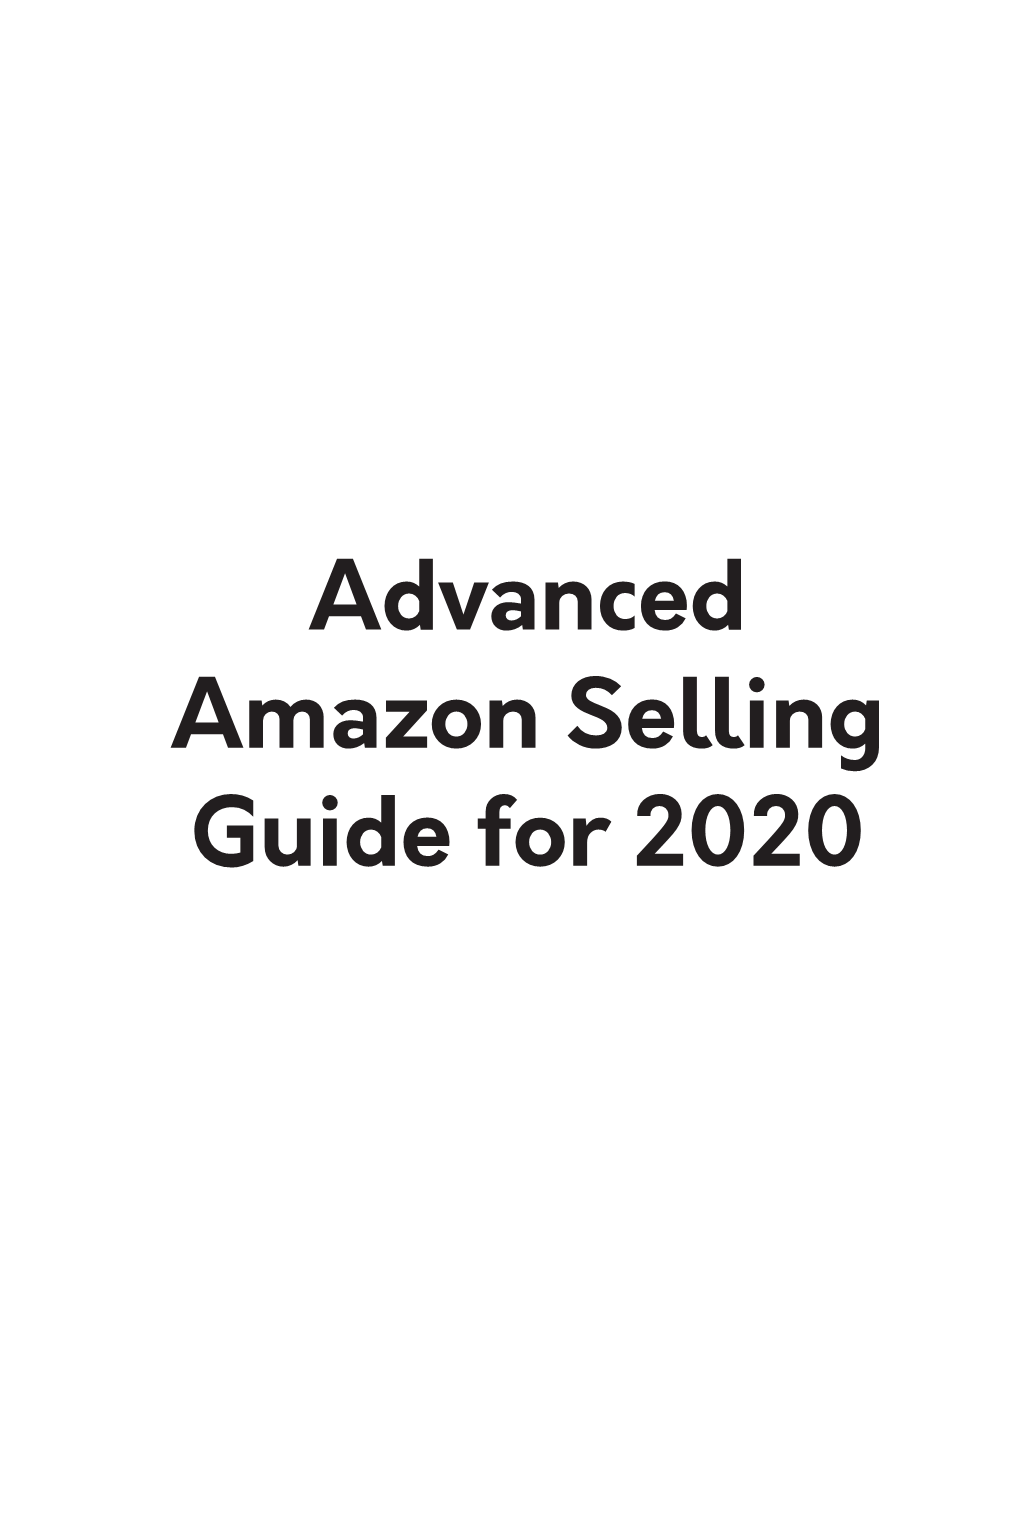 Advanced Amazon Selling Guide for 2020 Copyright © 2020 by AMZ Advisers